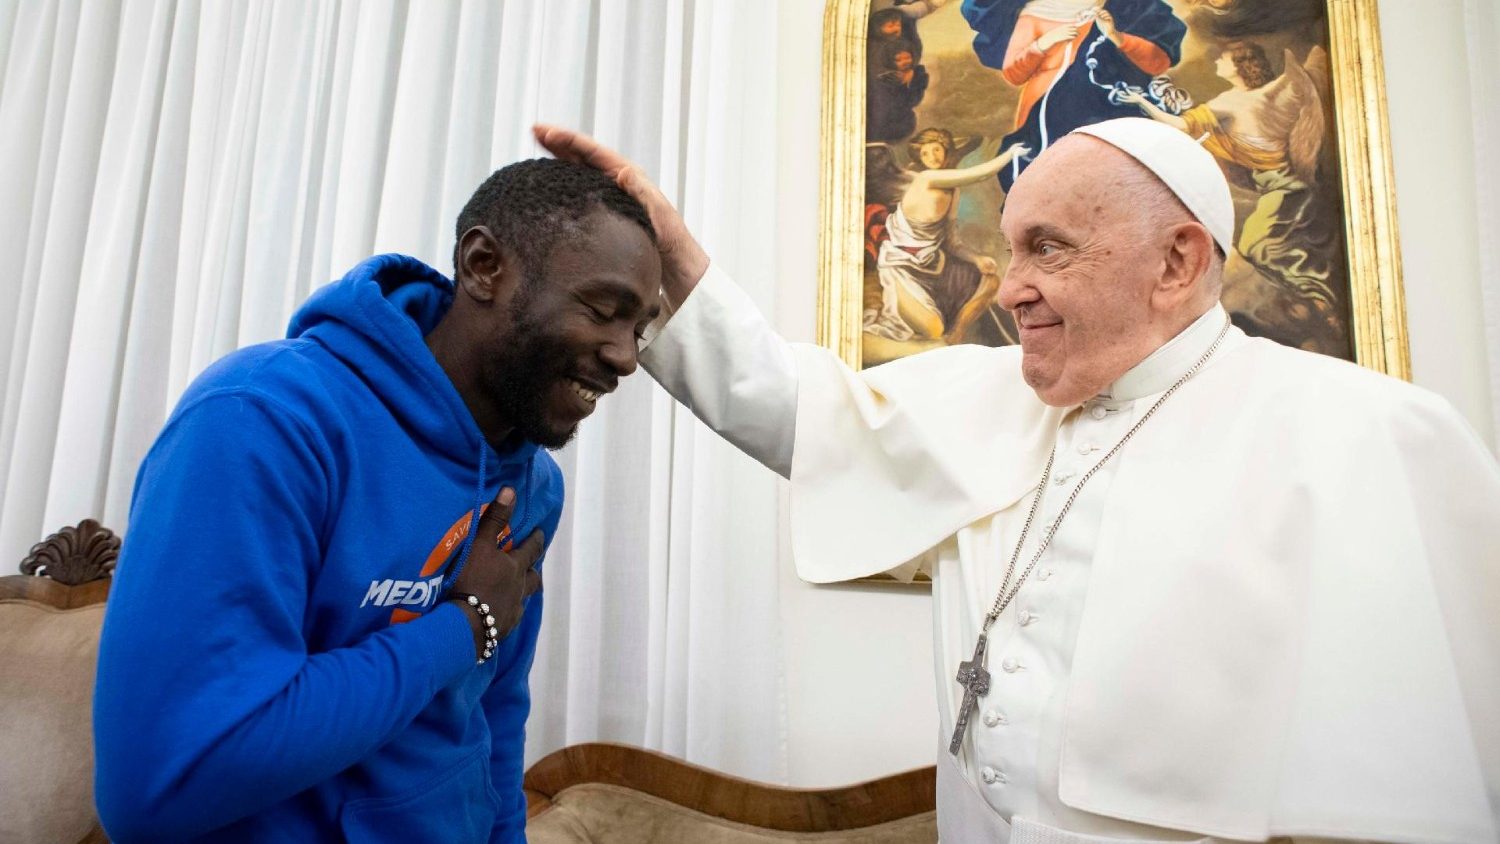 The Pope hugs the immigrant Pato: I prayed a lot for your family